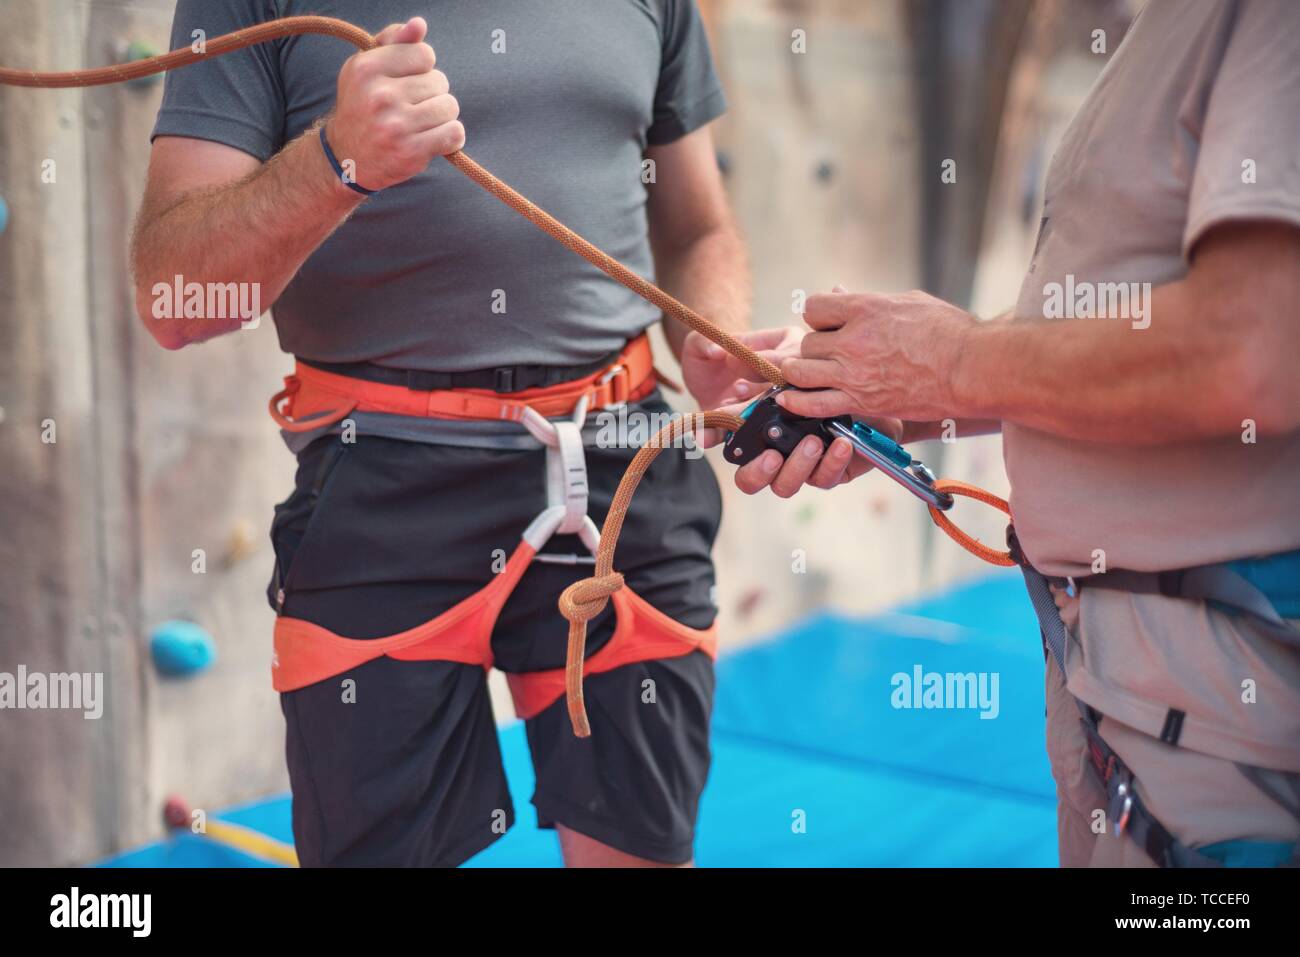 Rock wall climber wearing safety harness and climbing equipment indoor, close-up image. Stock Photo